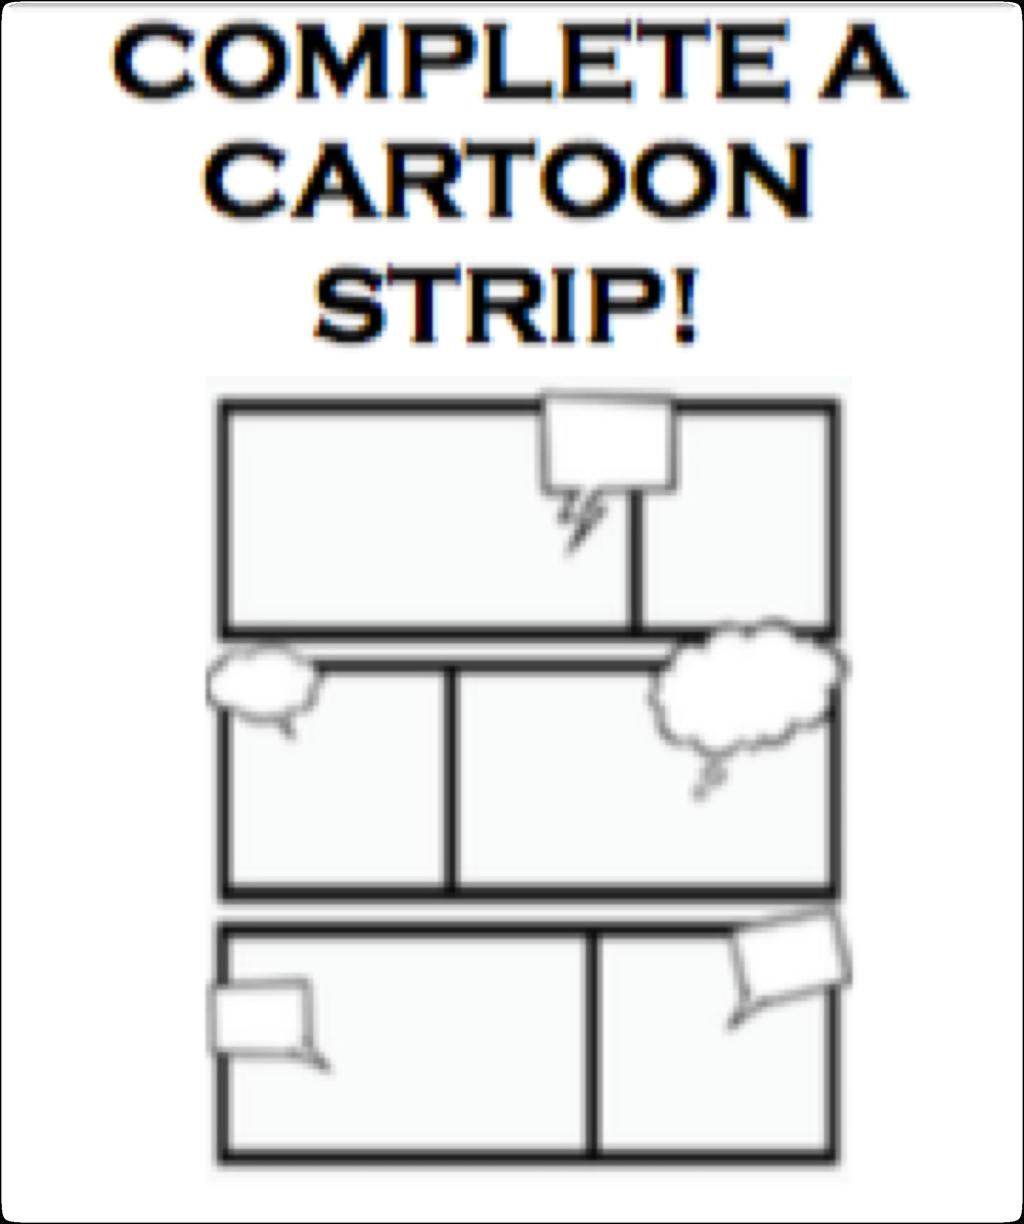 DIRECTIONS: o FOLD your paper in four sections to make boxes for a cartoon strip; you may use larger paper if you like or add more sections.